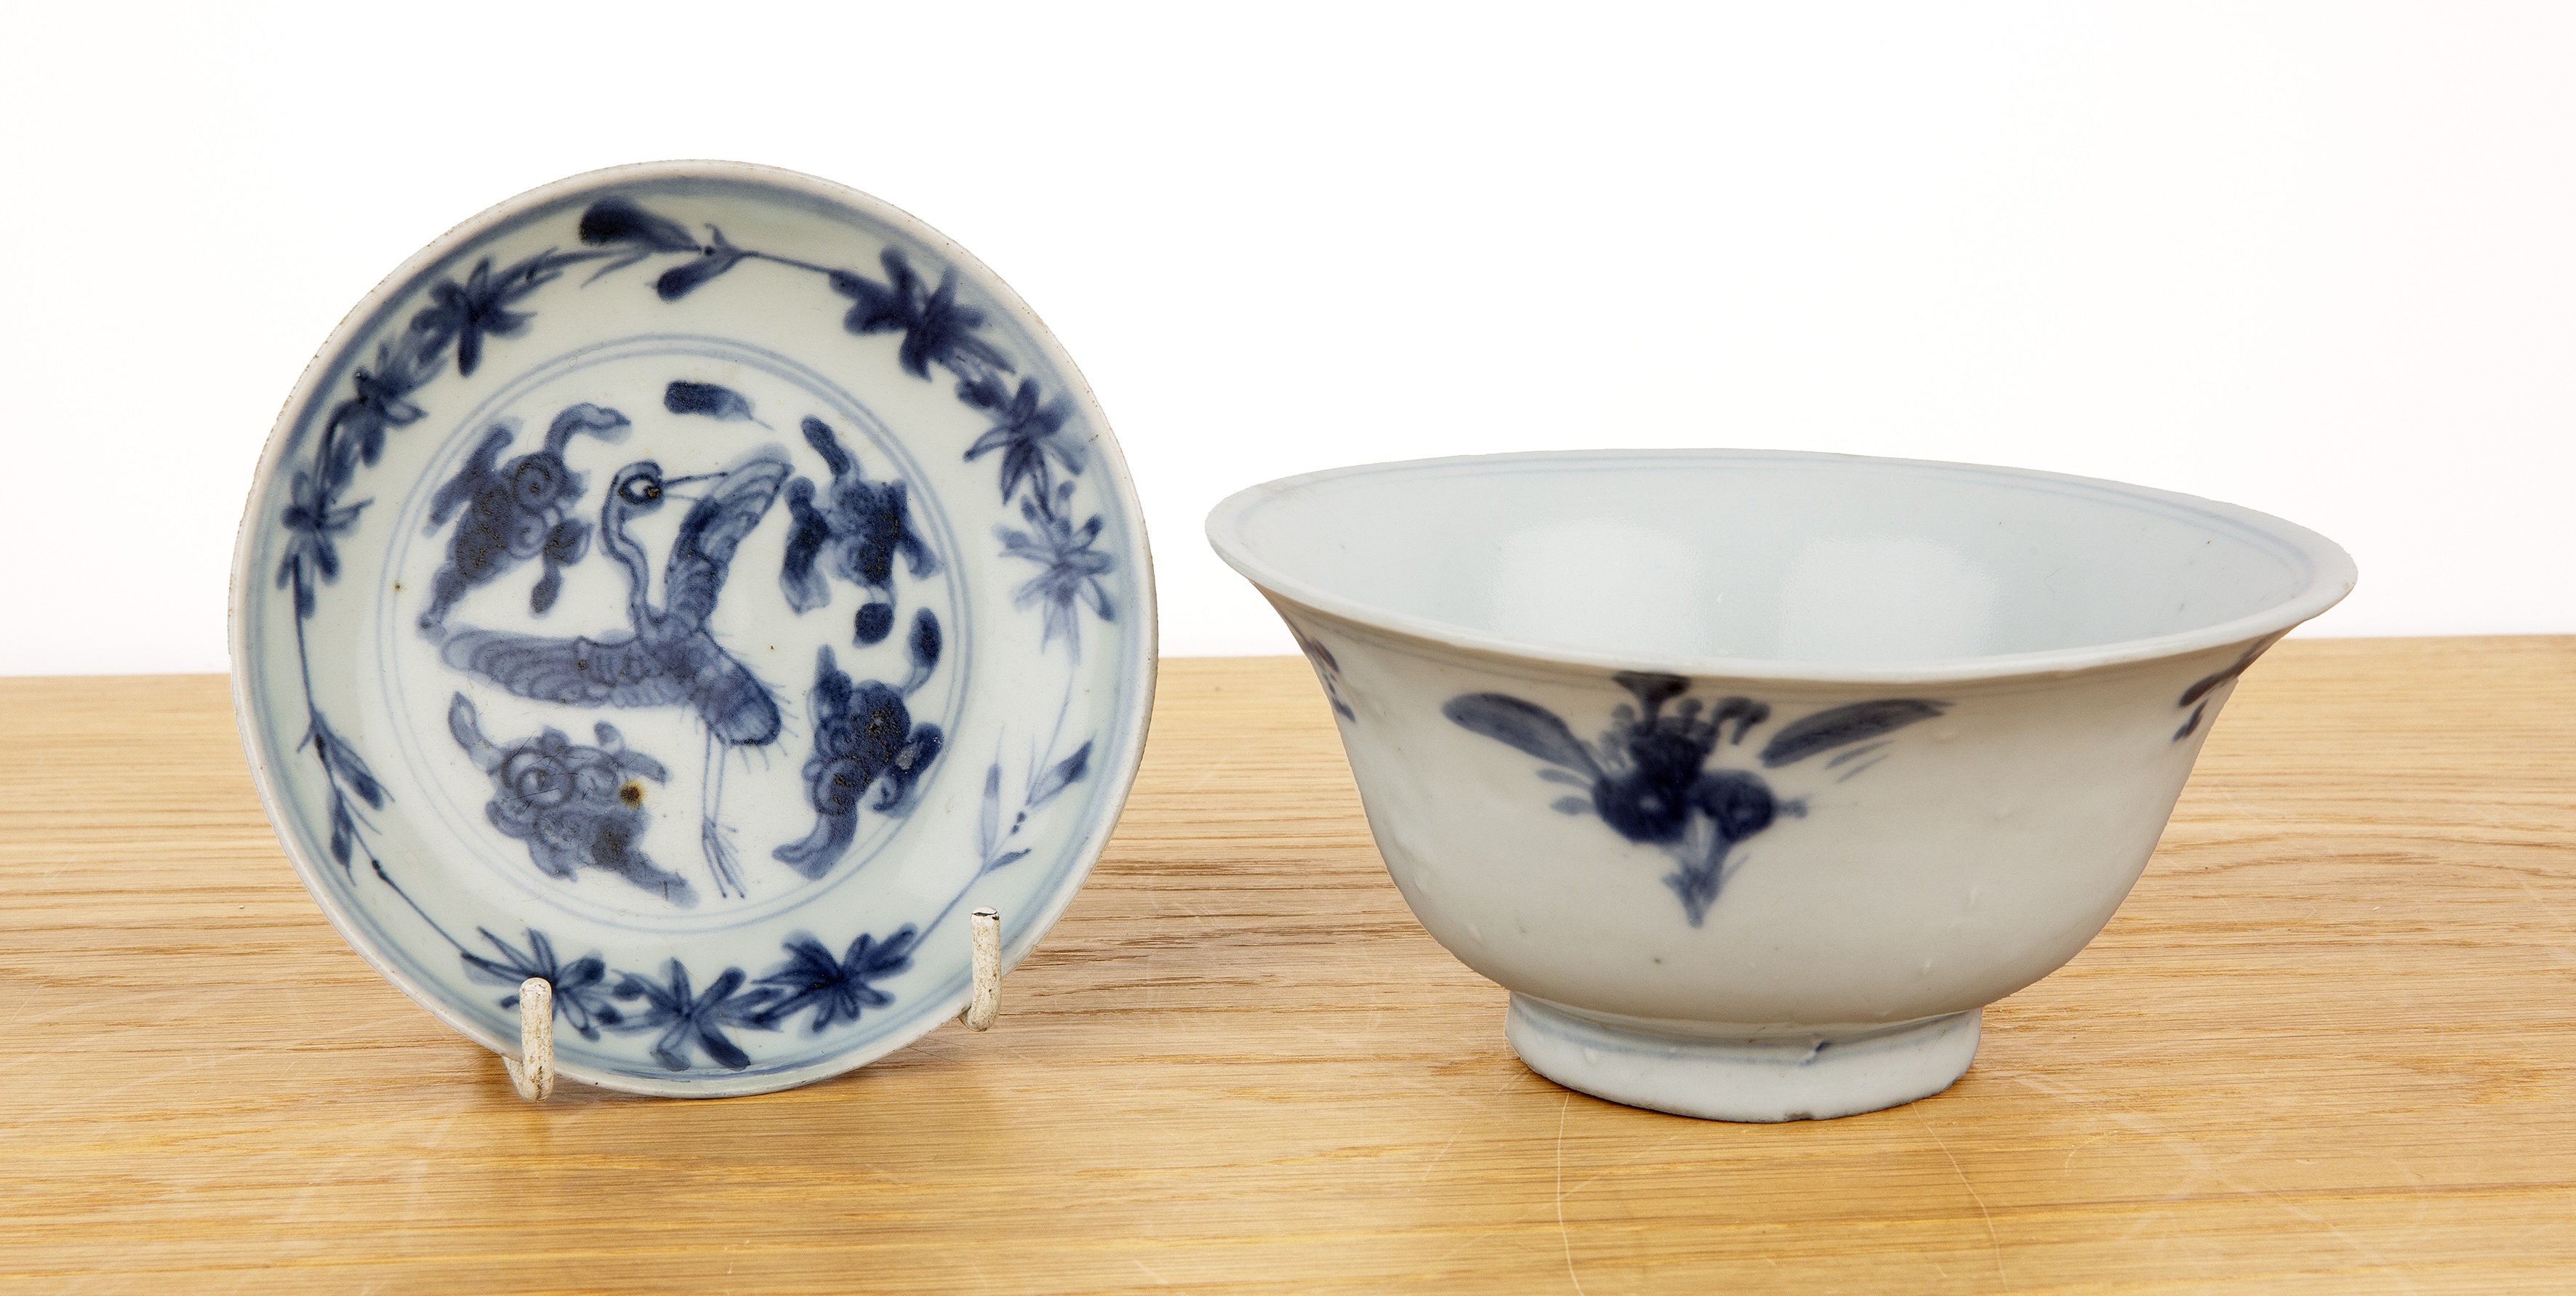 Blue and white porcelain provincial bowl Chinese 14.5cm diameter x 6.8cm high and a small Ming